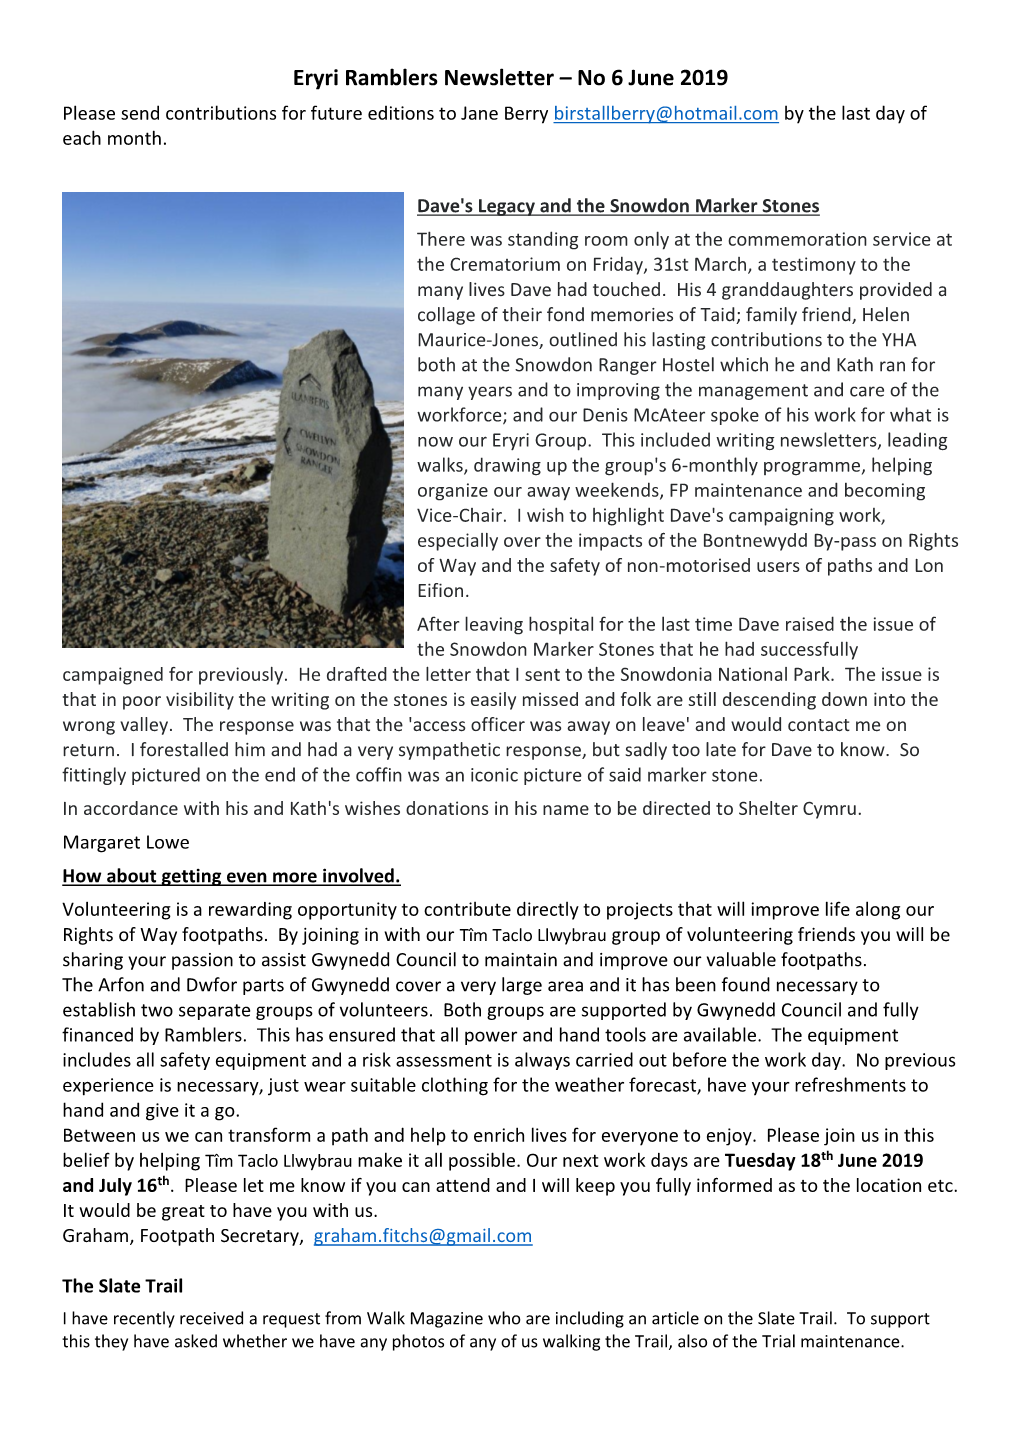 Eryri Ramblers Newsletter – No 6 June 2019 Please Send Contributions for Future Editions to Jane Berry Birstallberry@Hotmail.Com by the Last Day of Each Month